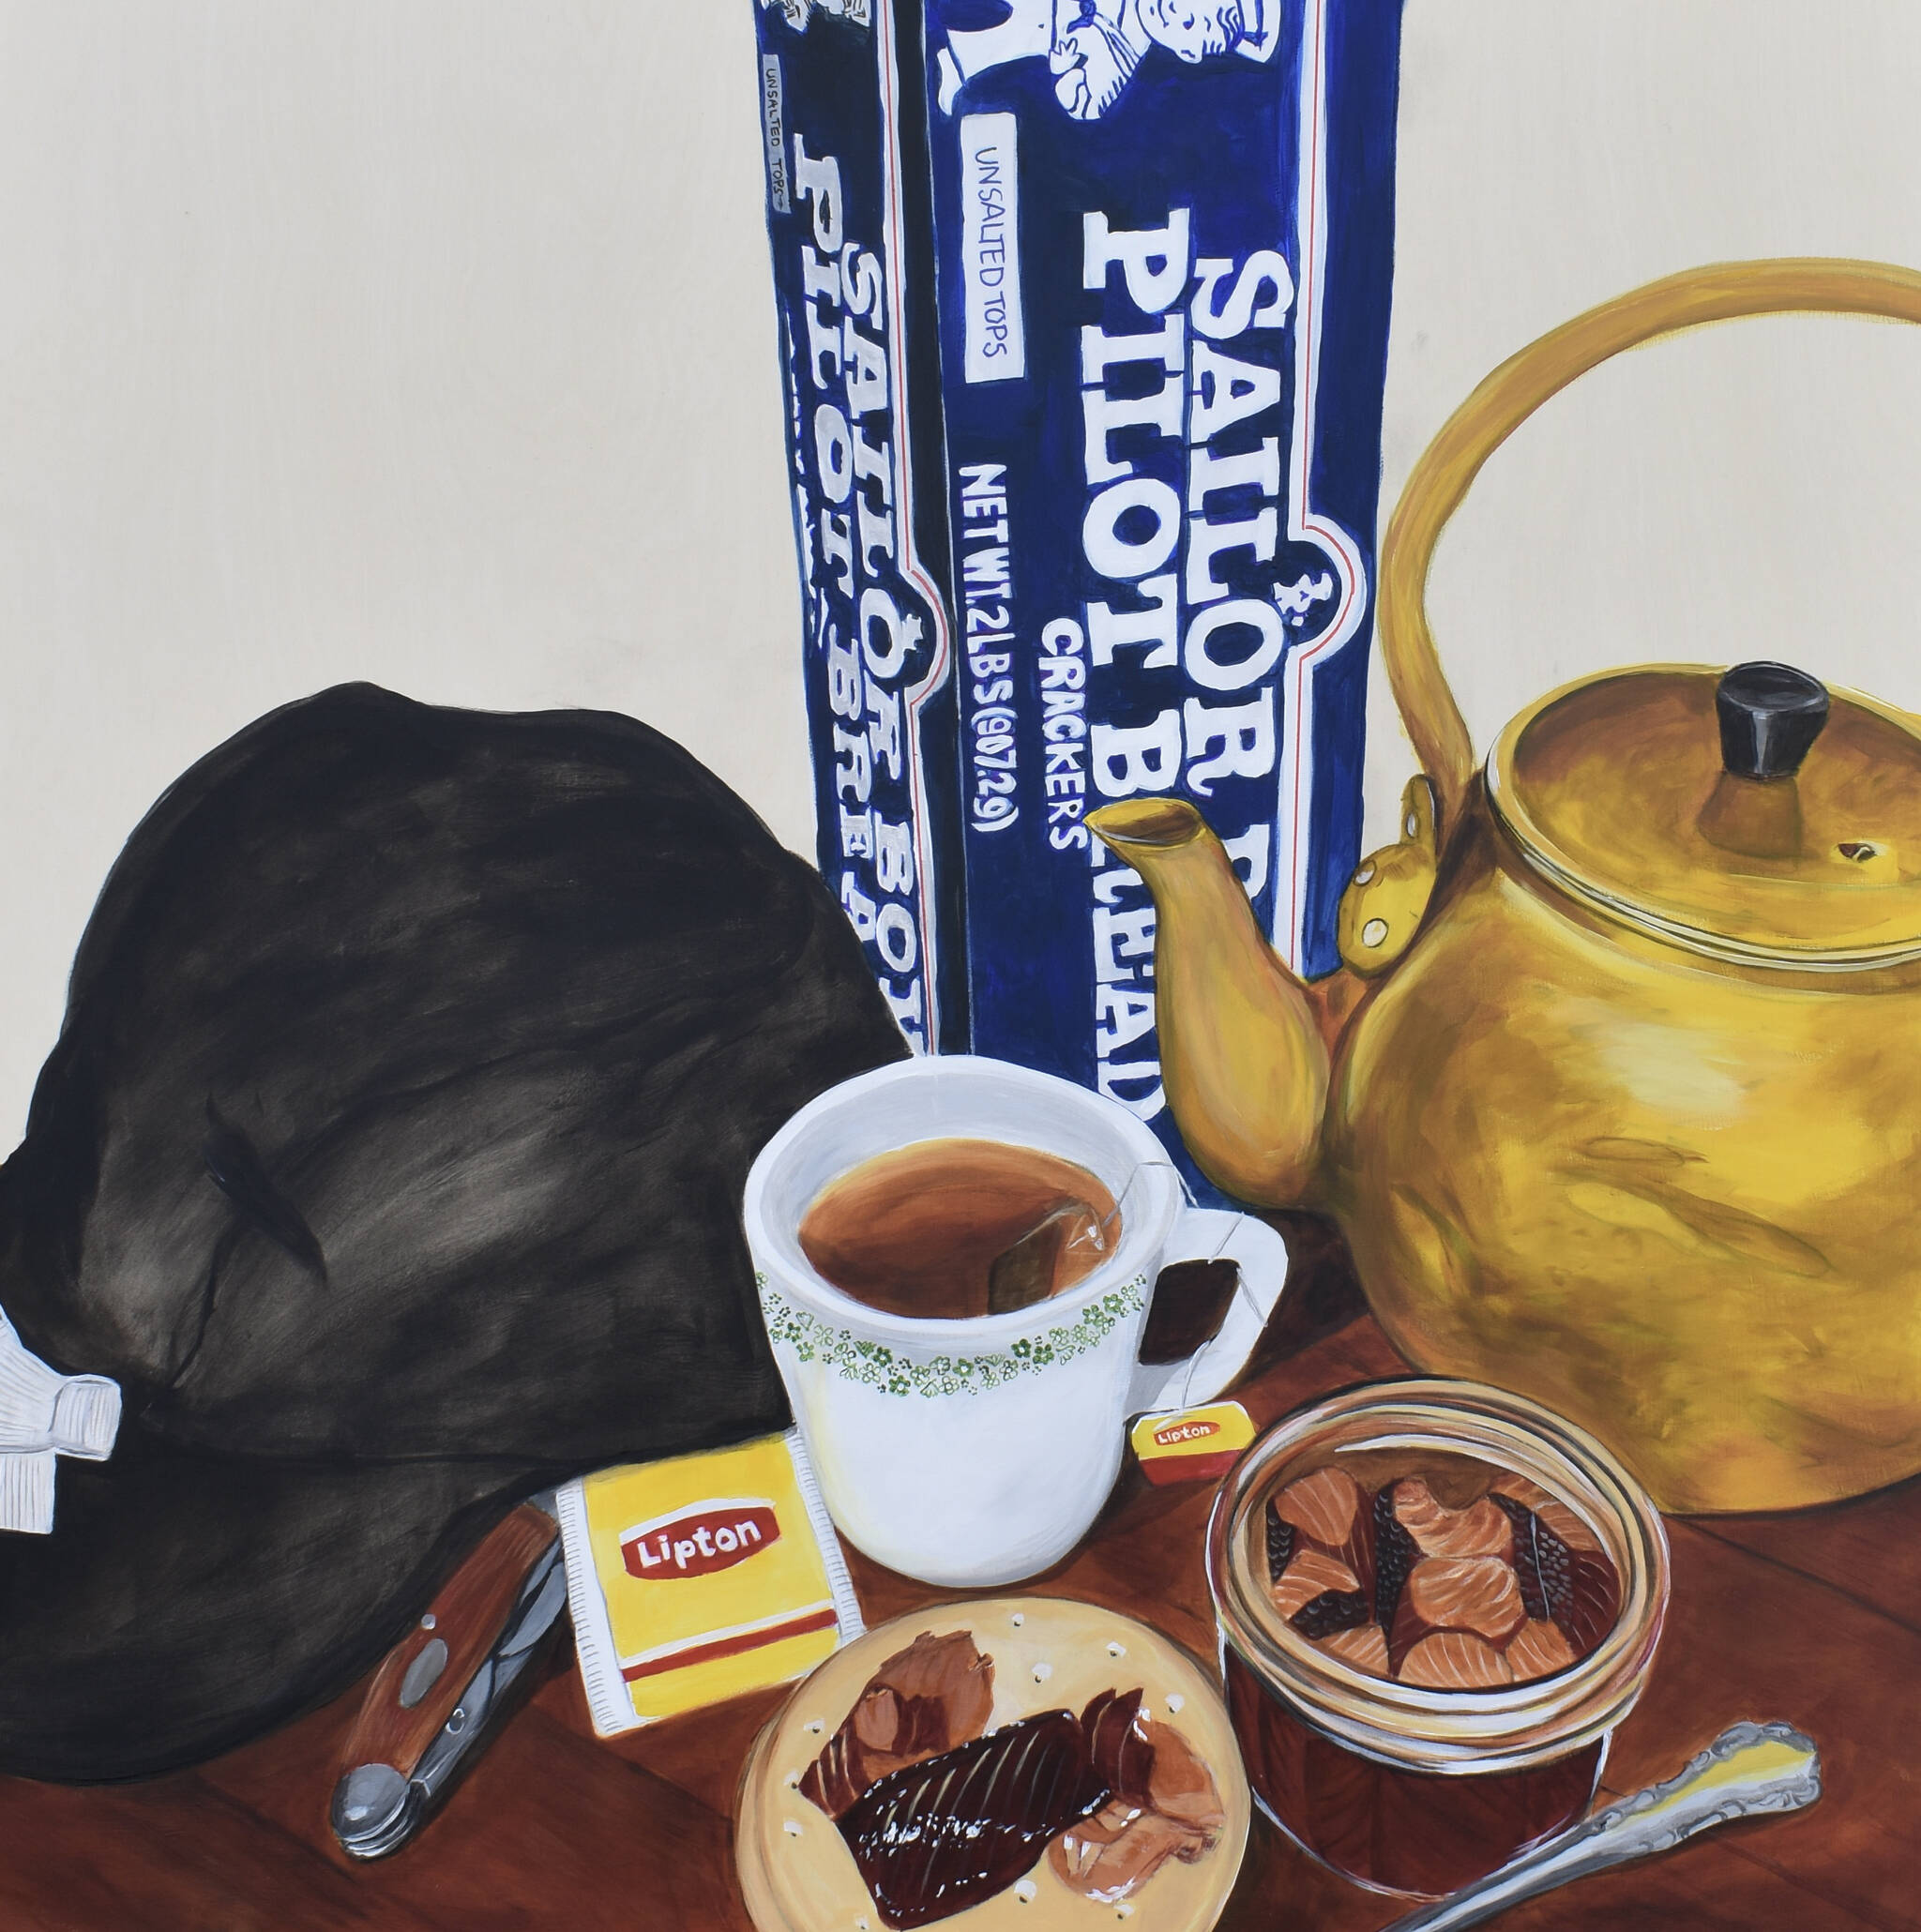 “Pilot Bread,” an oil painting by Danielle Larsen, is one of numerous artworks by several artists on display at Bunnell Street Arts Center through July in Homer, Alaska. Photo provided by Bunnell Street Arts Center